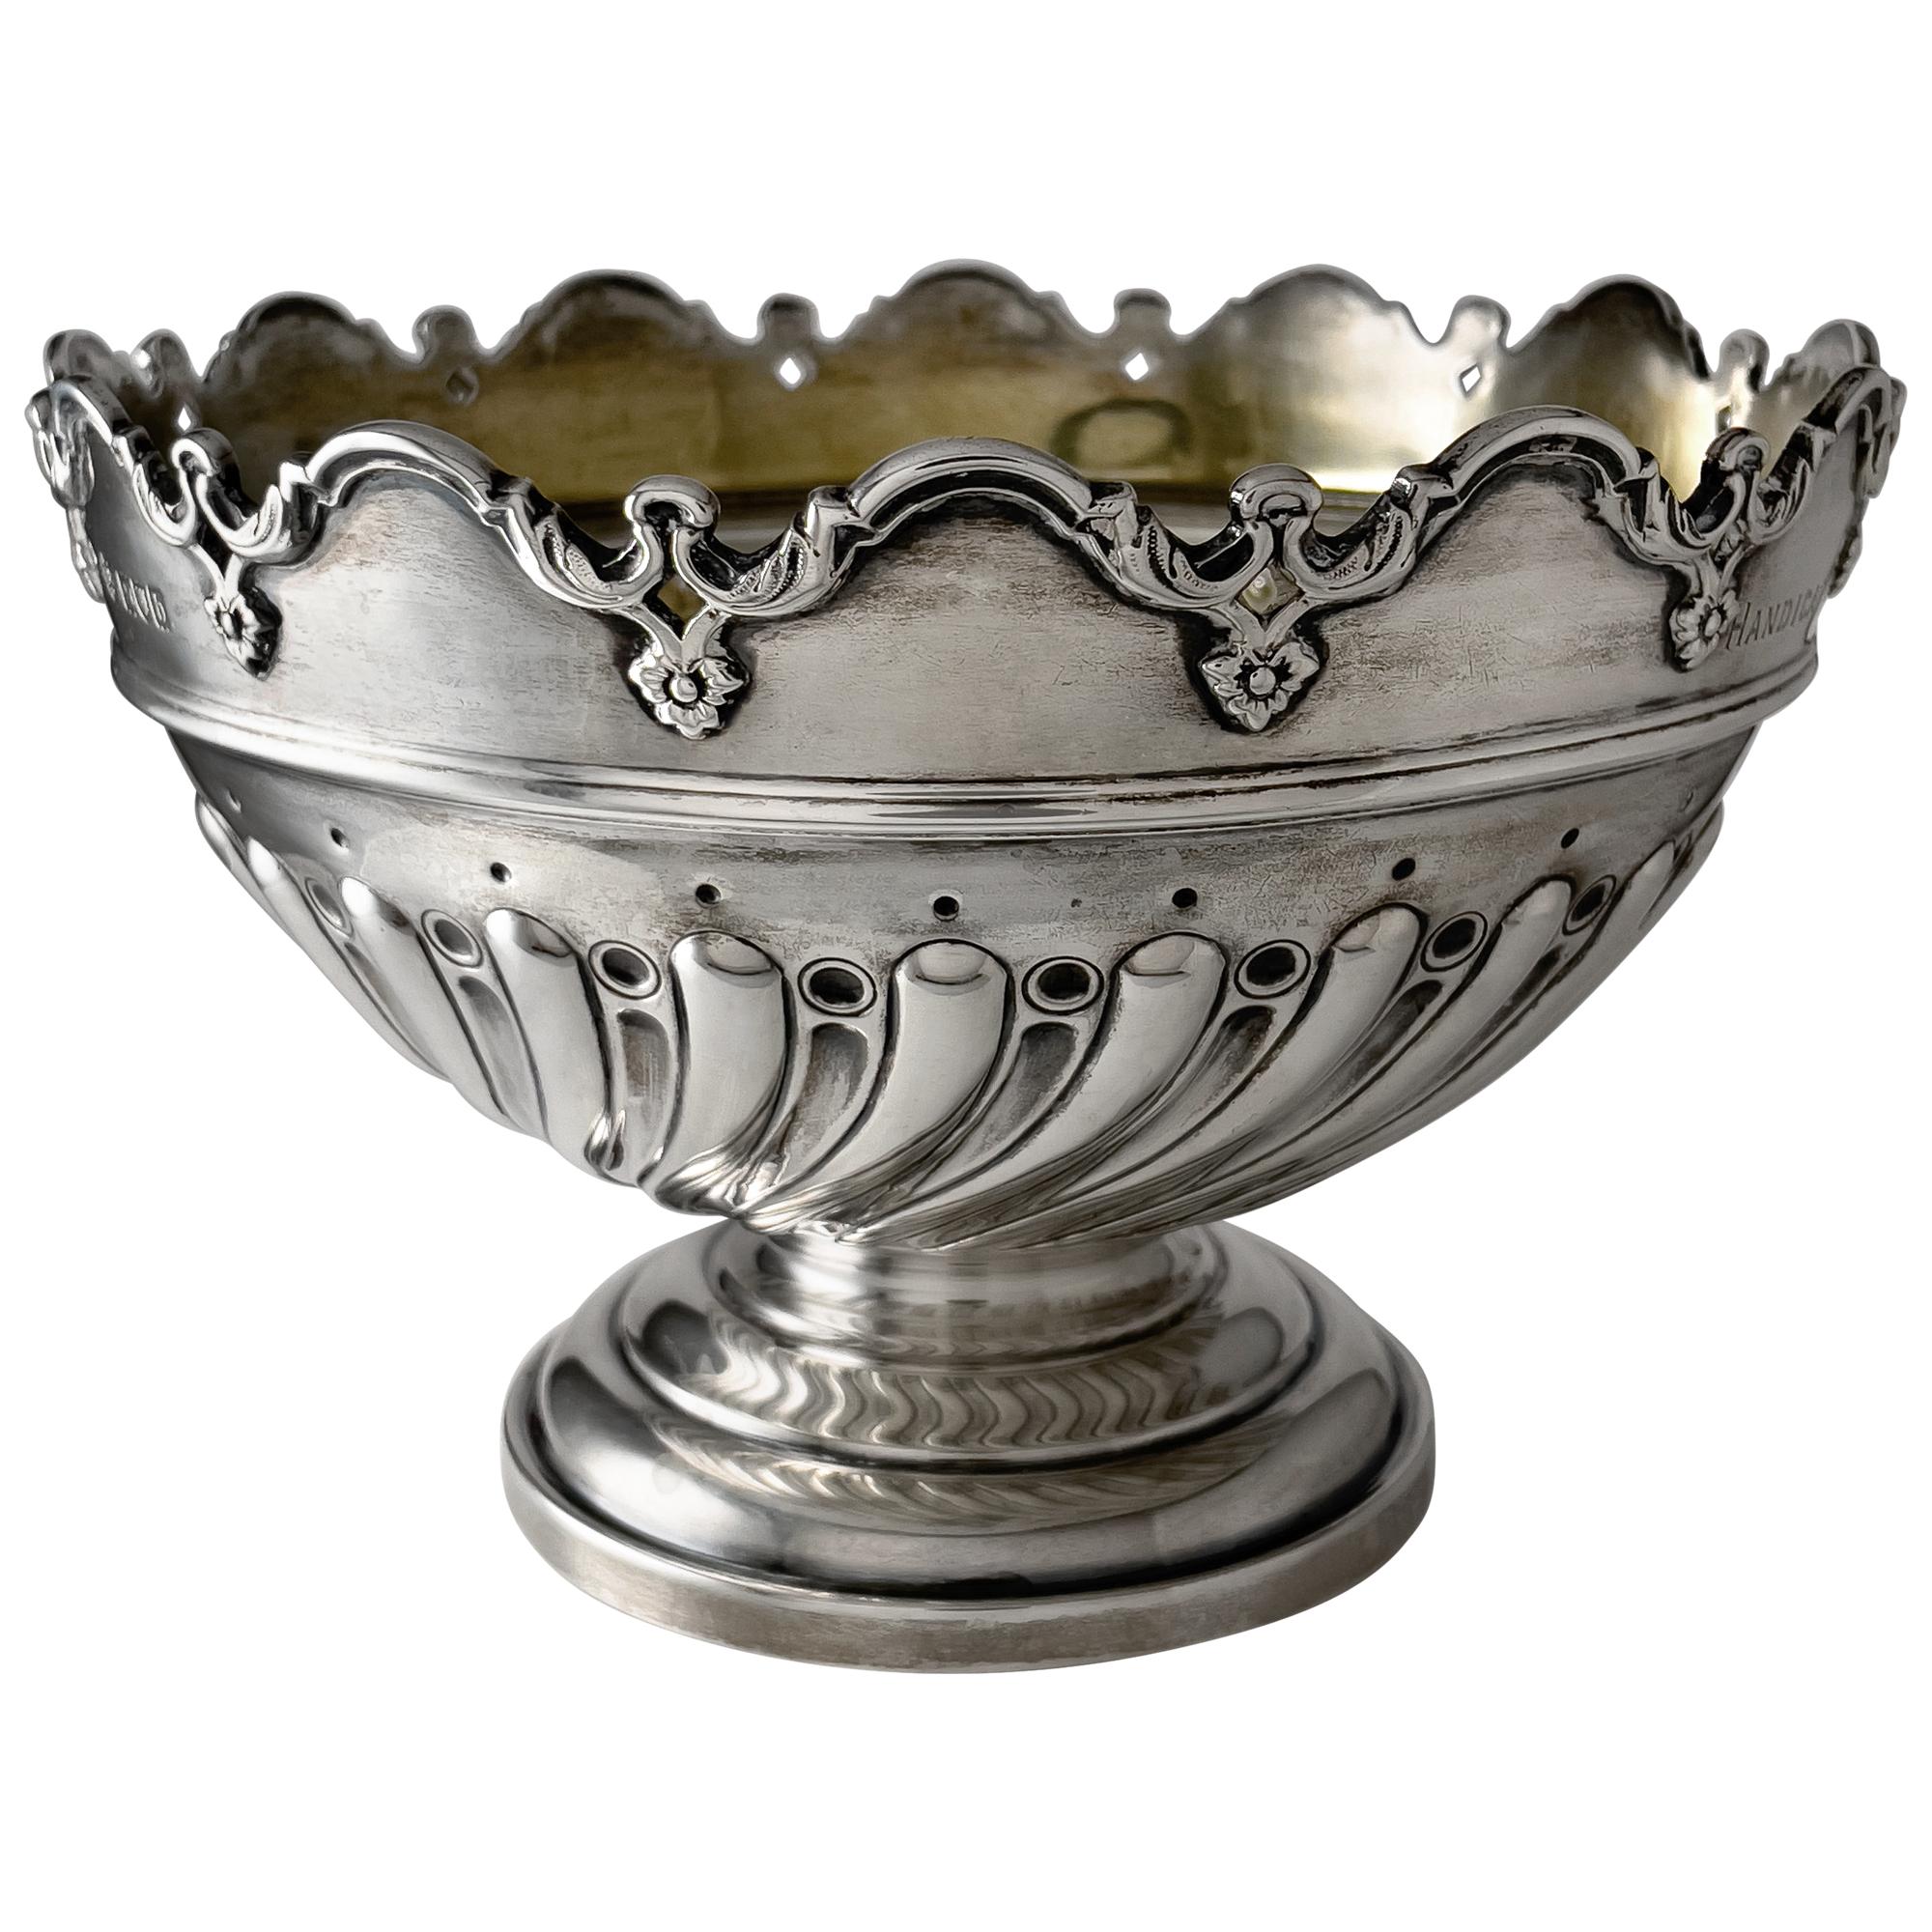 English London Sterling Silver Trophy, 1897. Hand engraved 